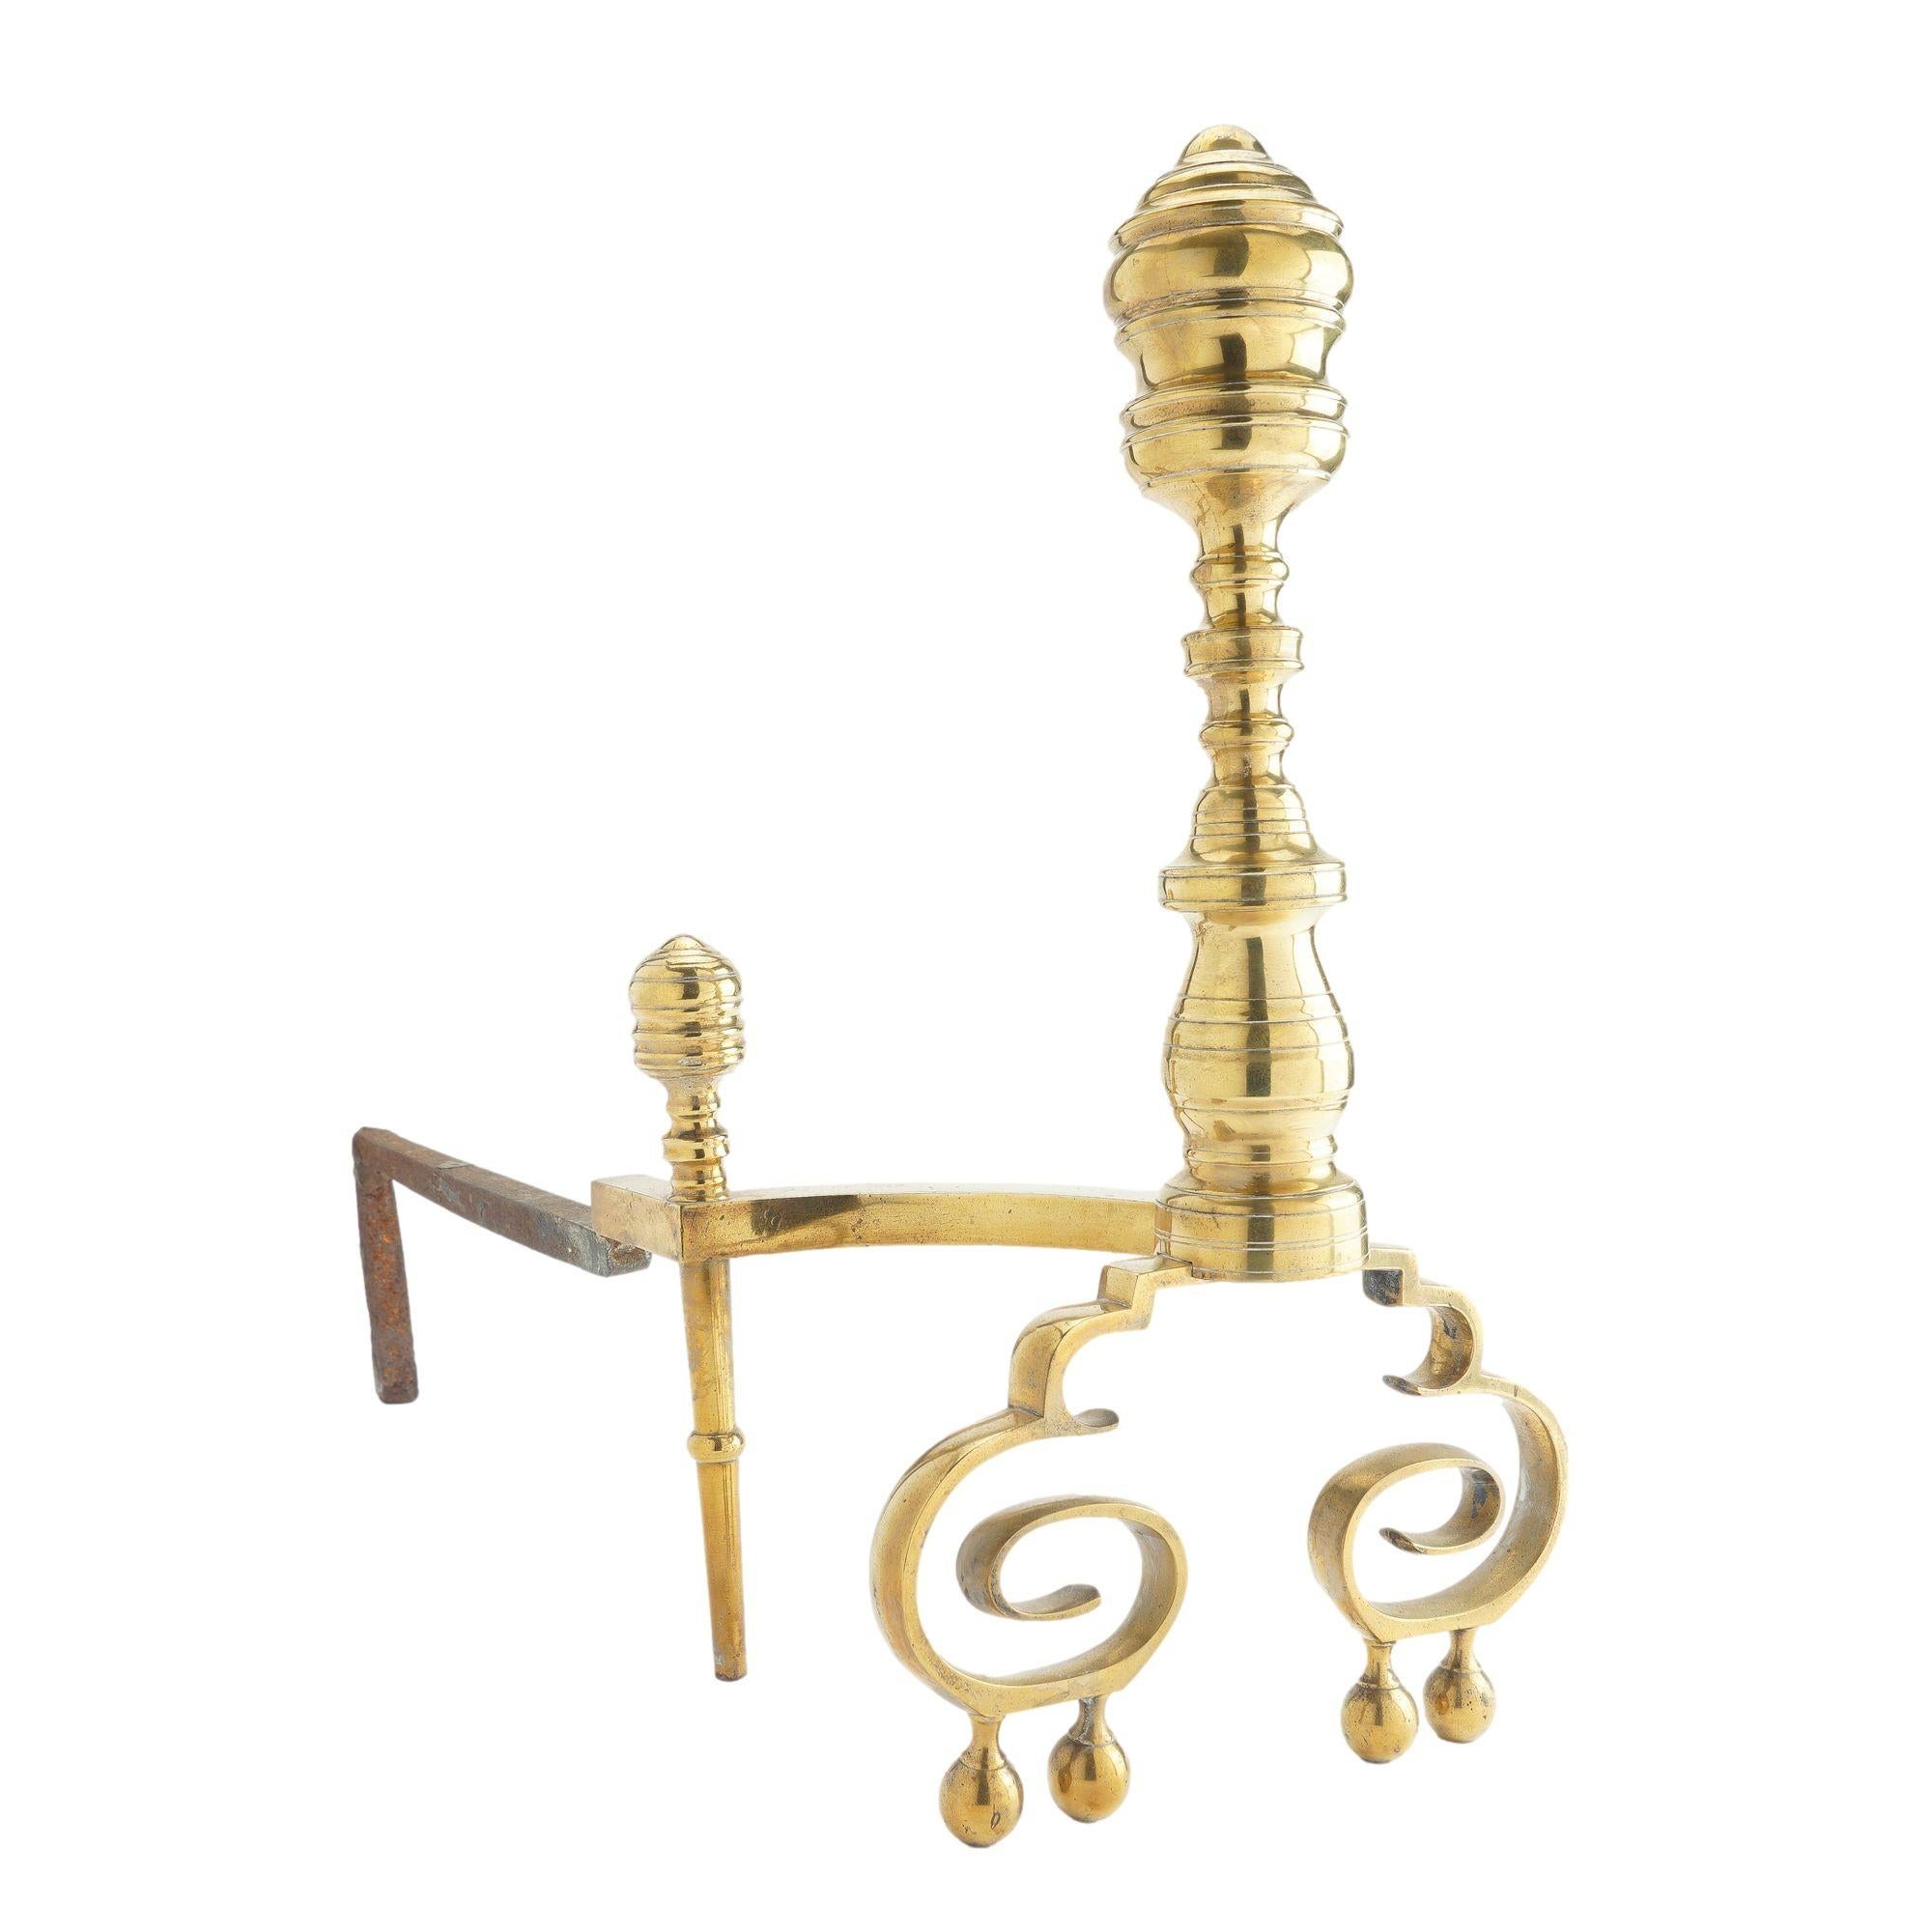 Brass Pair of Philadelphia Neoclassic brass andirons with fire tools, c. 1815-25